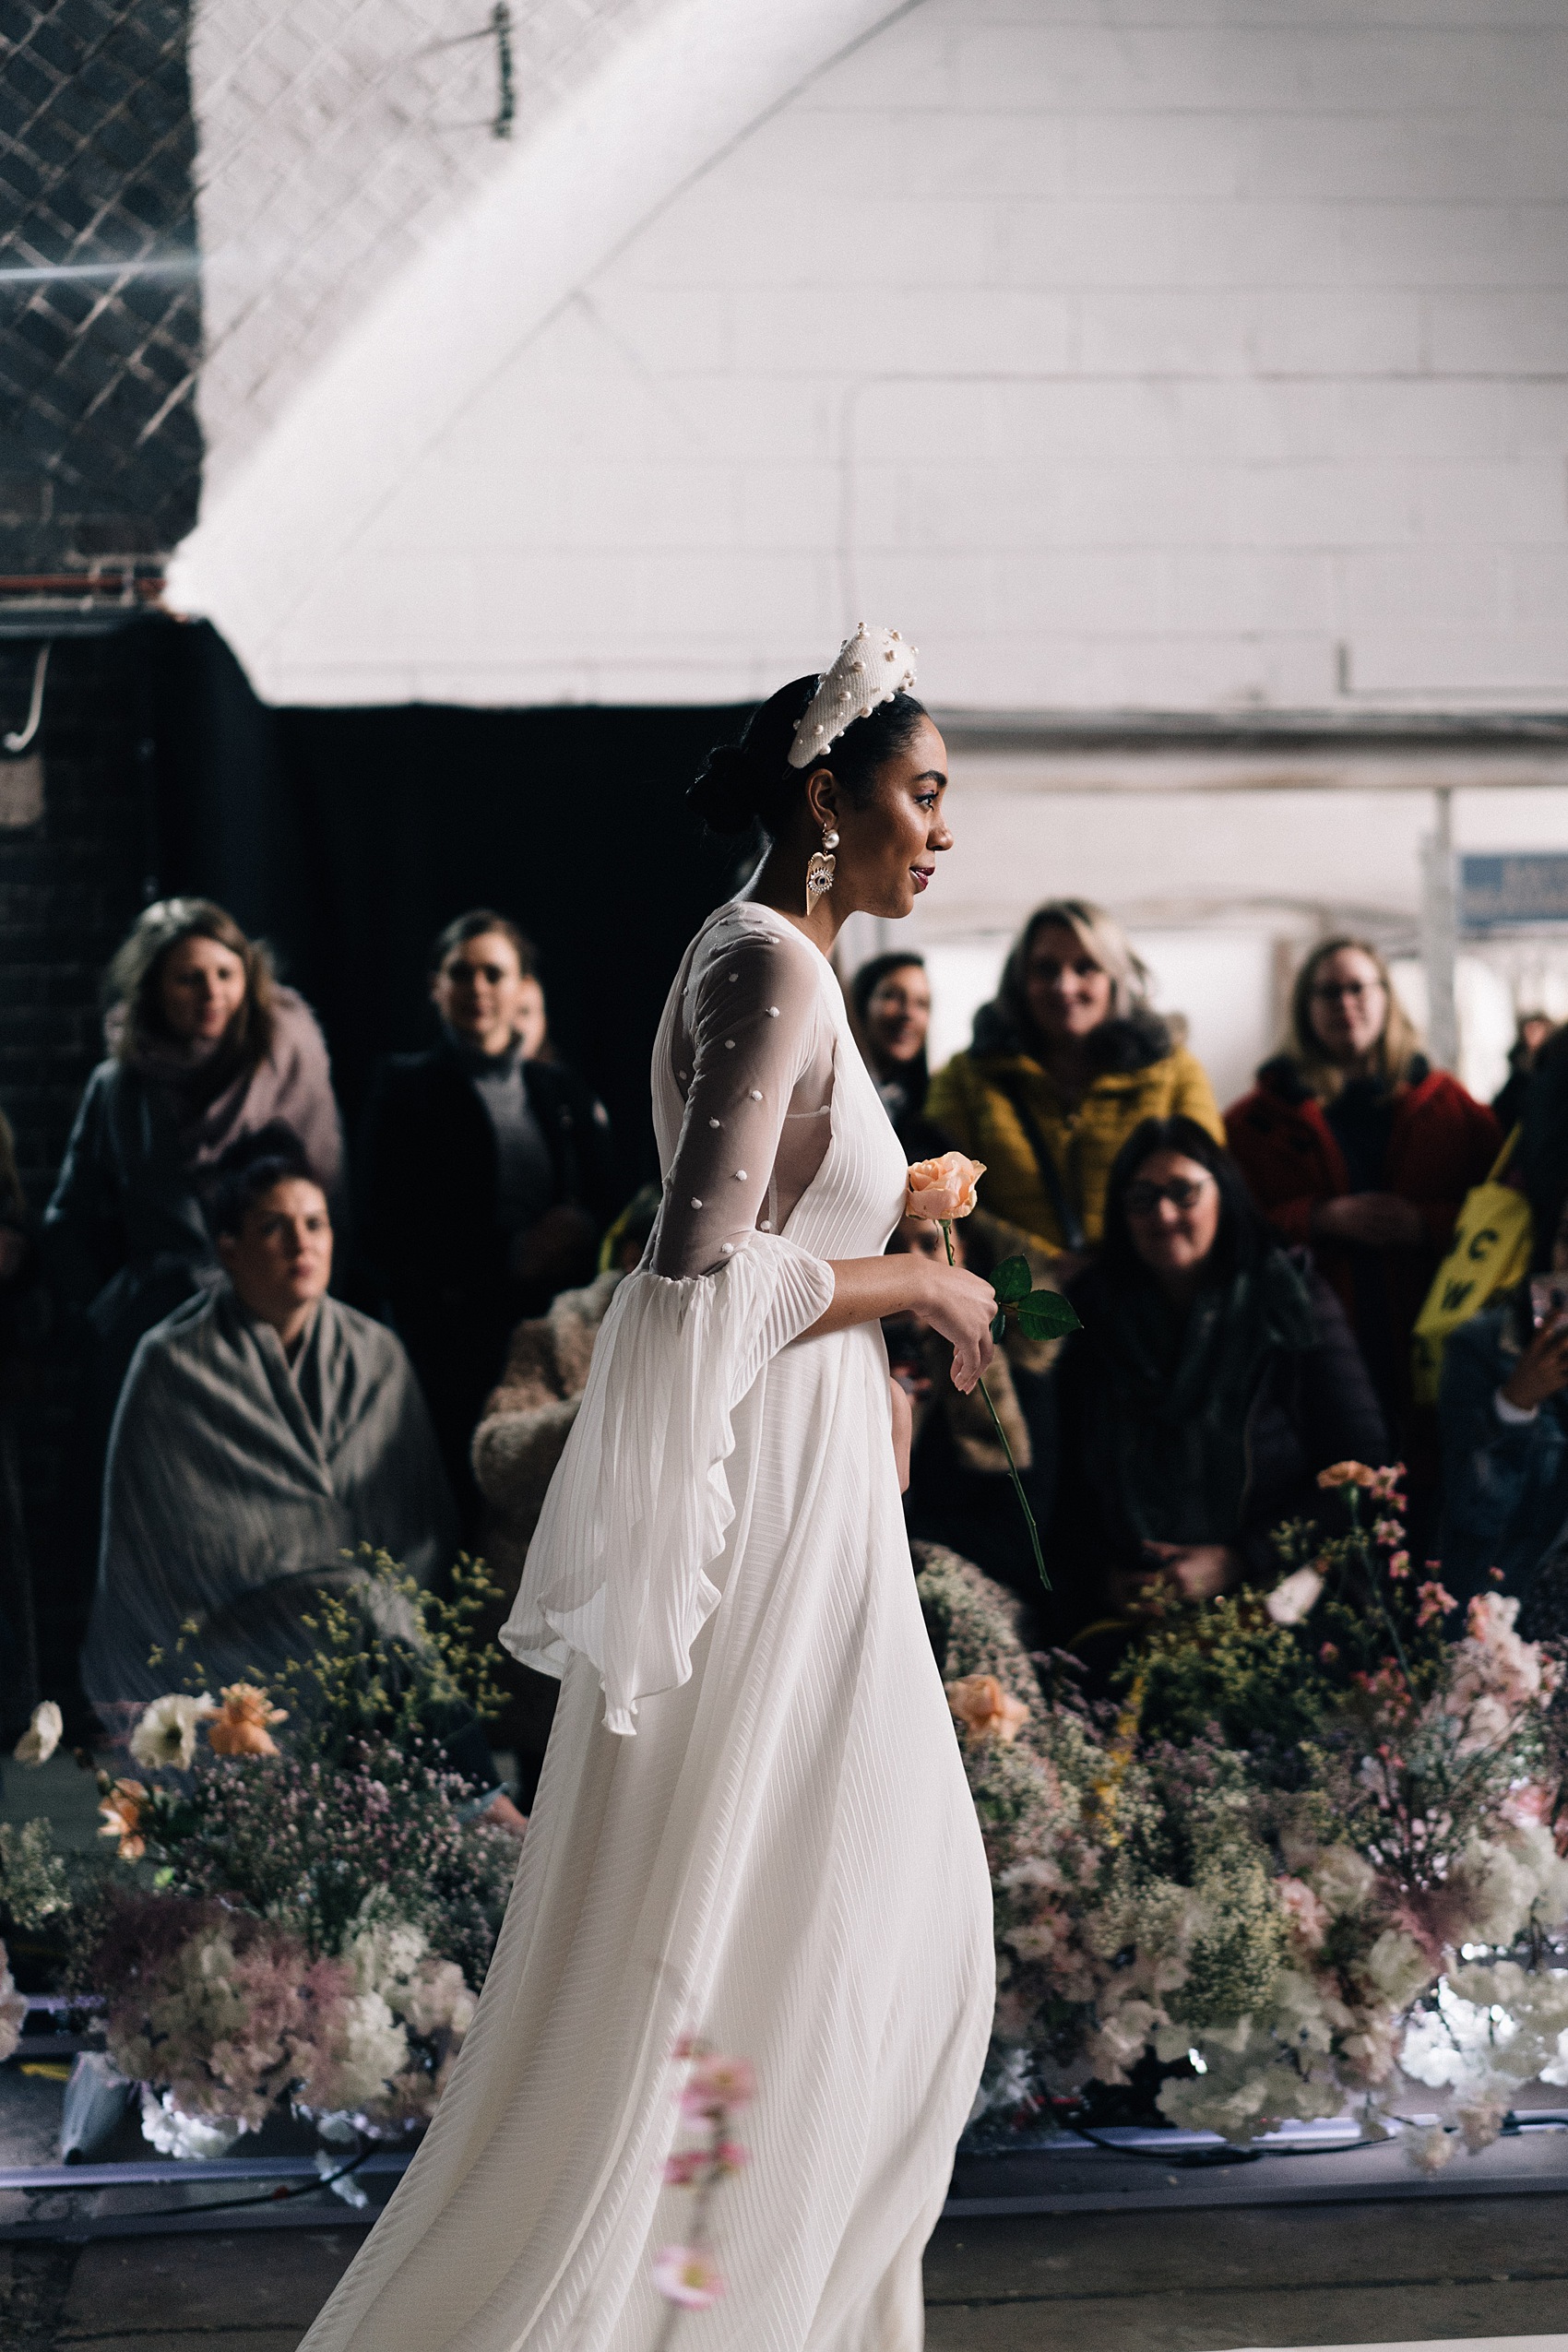 55 Most Curious Manchester wedding show for modern brides